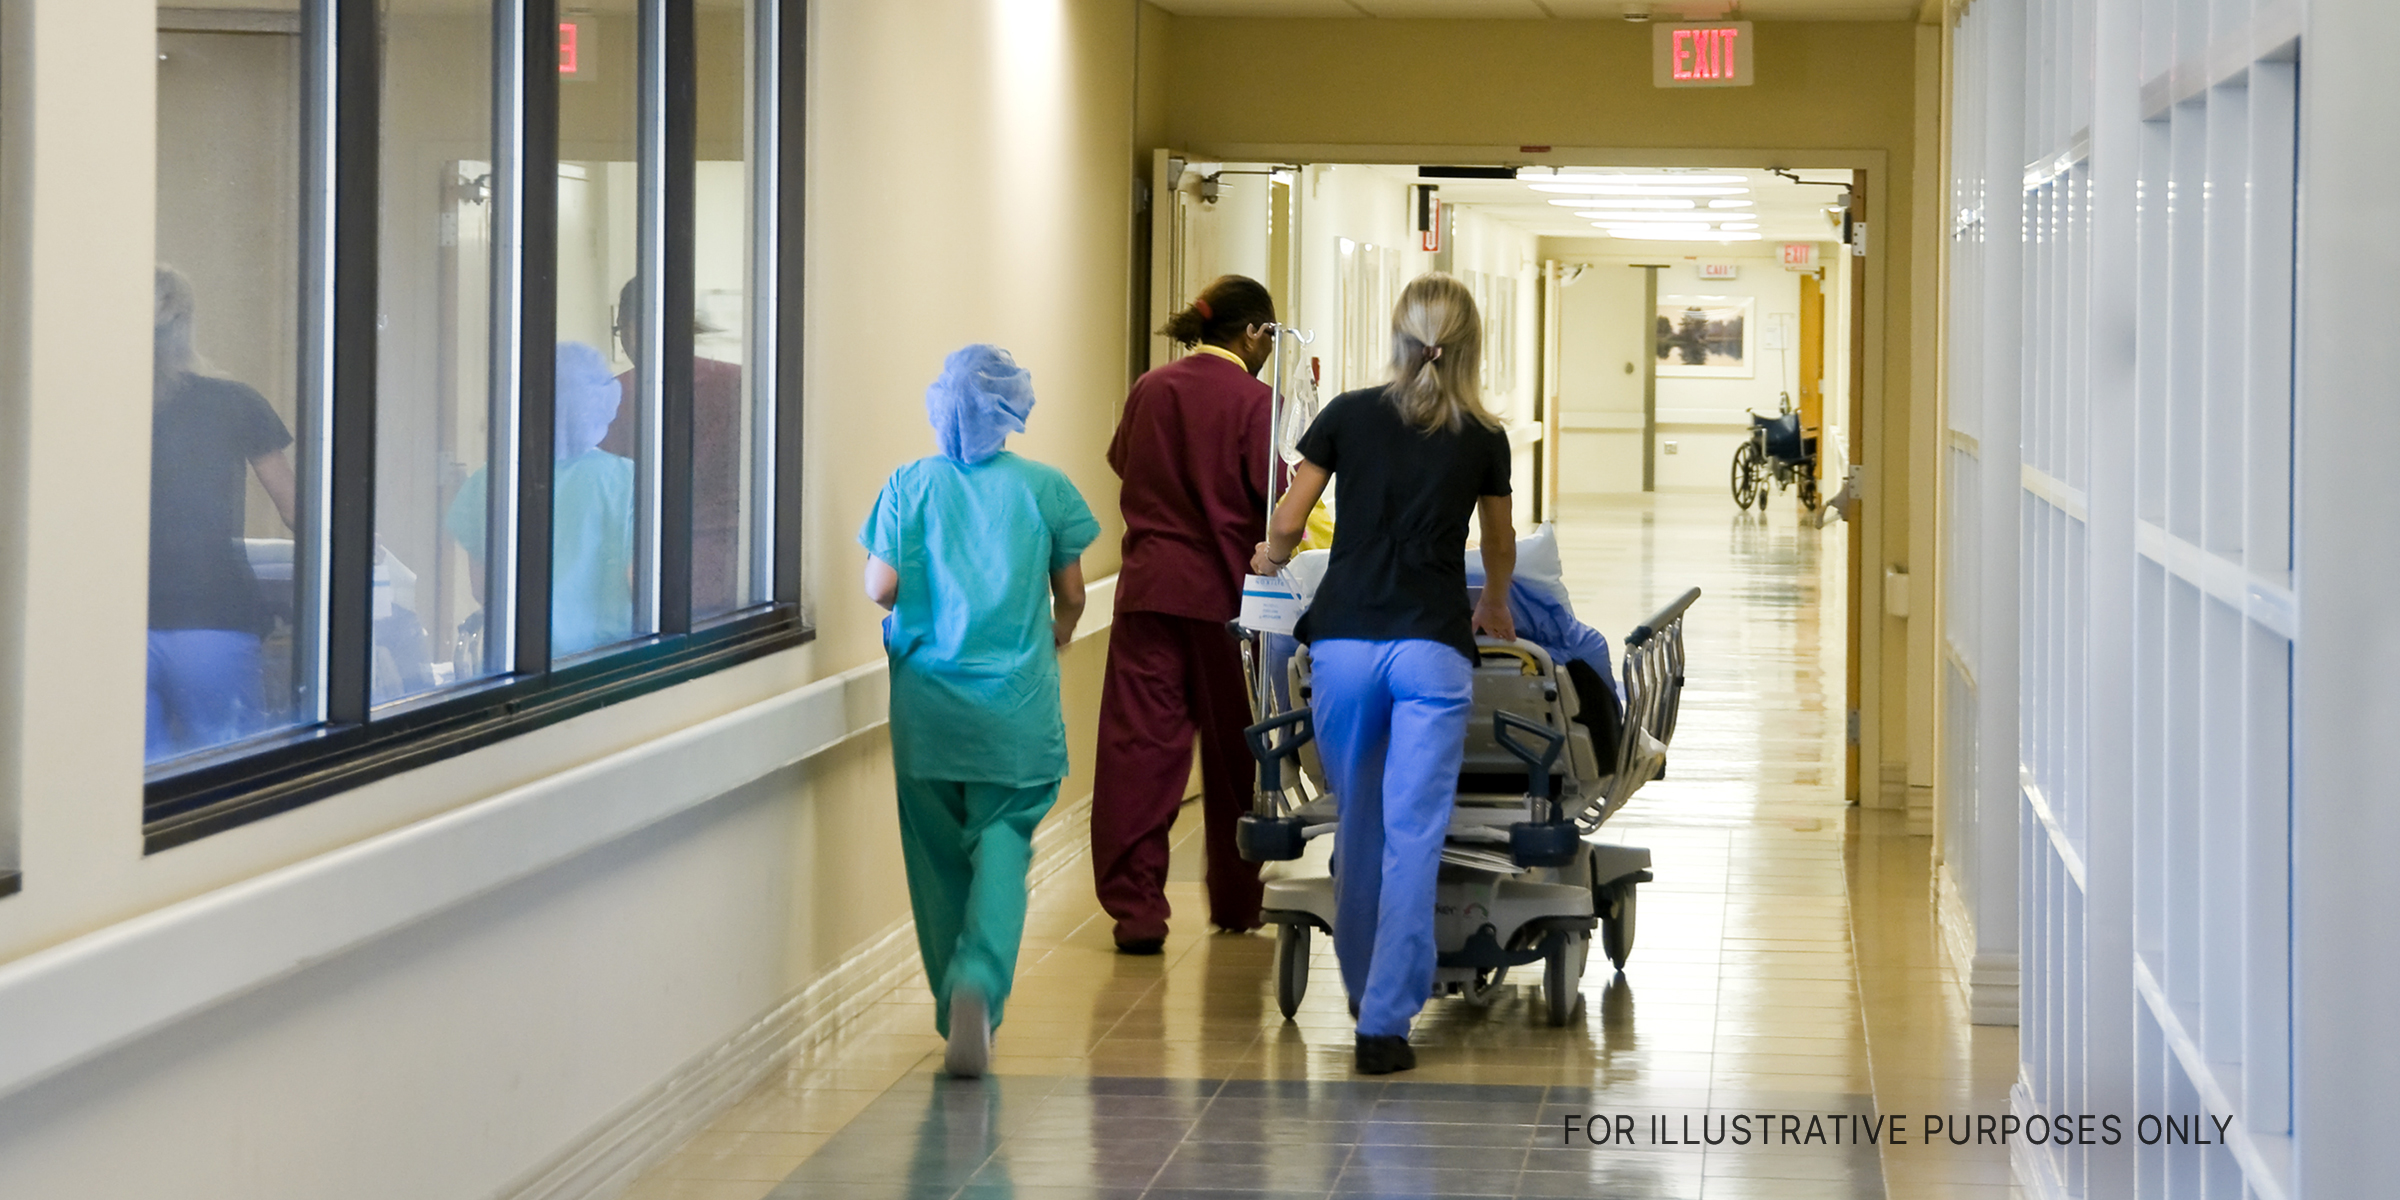 Hospital staff taking patient to the ward | Source: Shutterstock